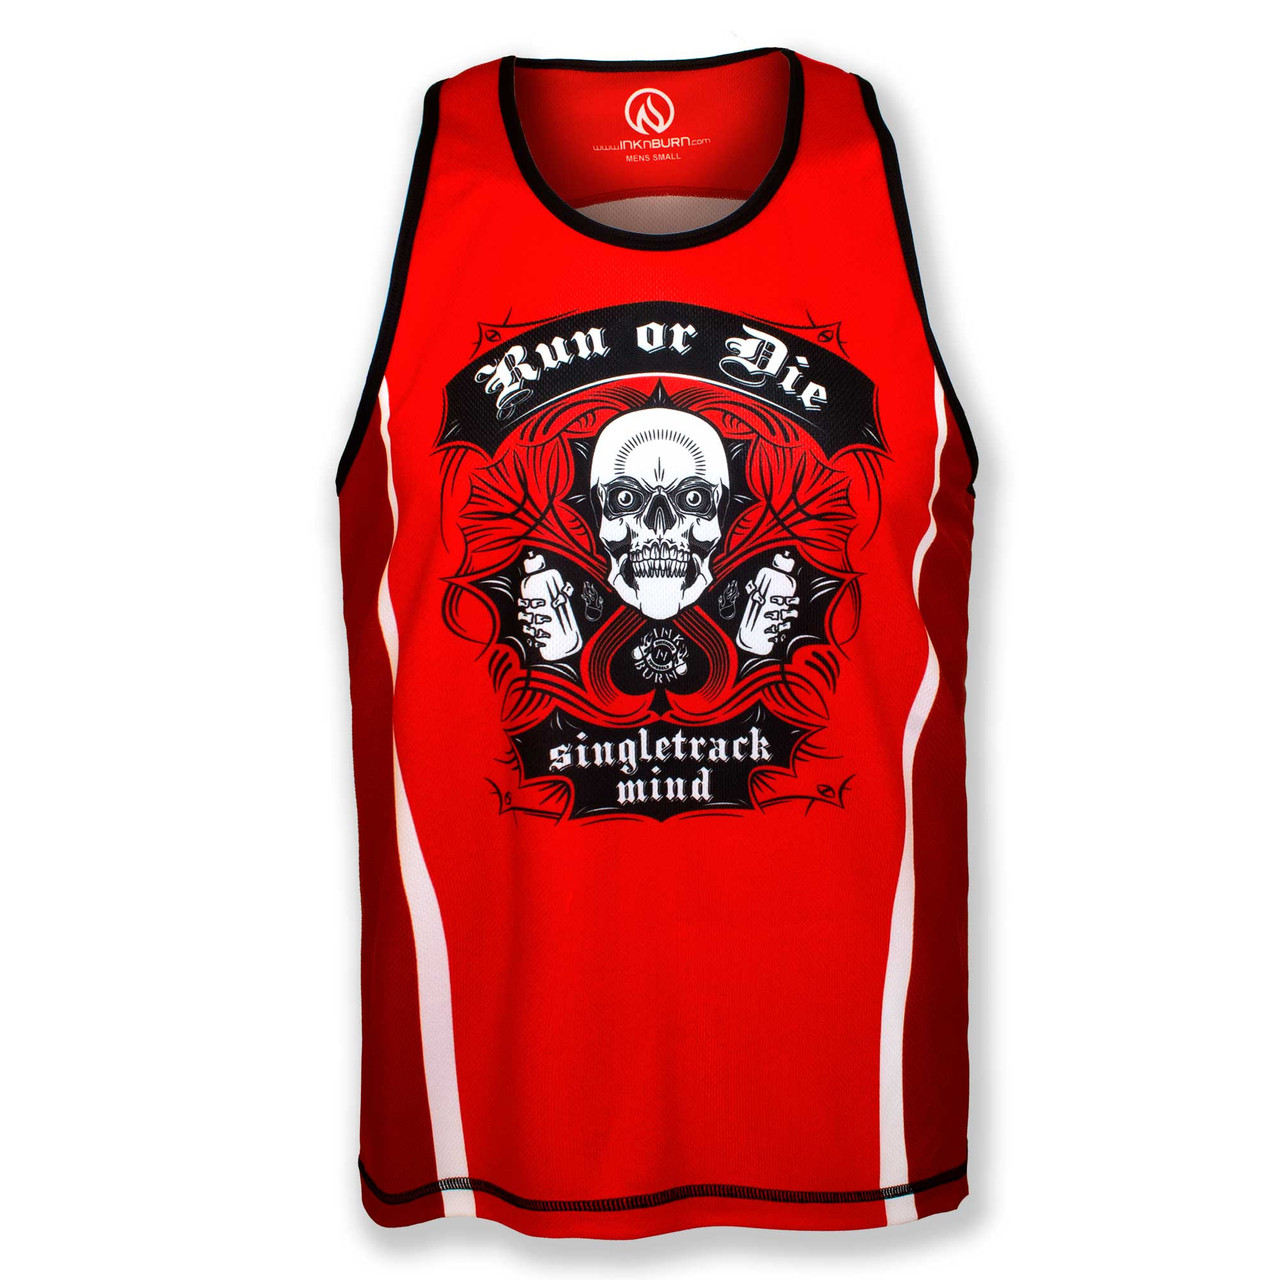 Men's Red Run or Die Singlet Tank for Running, Cross fit, Lifting and Races